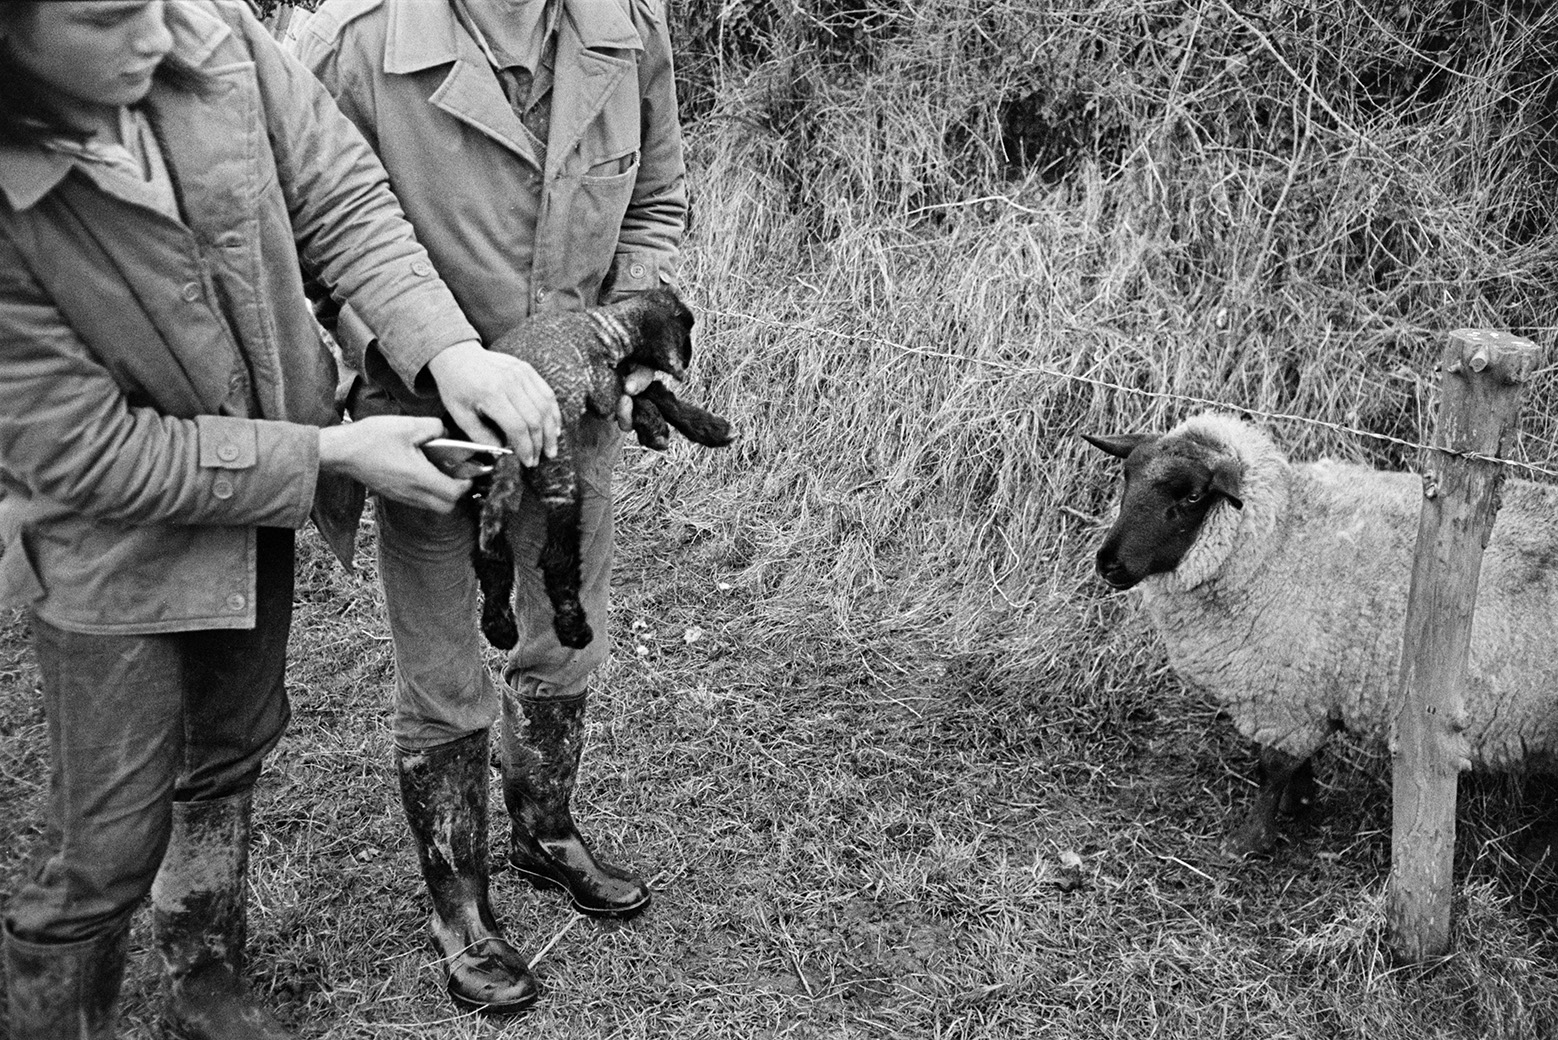 Derek Bright docking the tail of new born lamb in a field at Mill Road Farm, Beaford. Another person is stood next to him, possibly Ivor Bourne, and a ewe is watching. The farm was also known as Jeffrys.